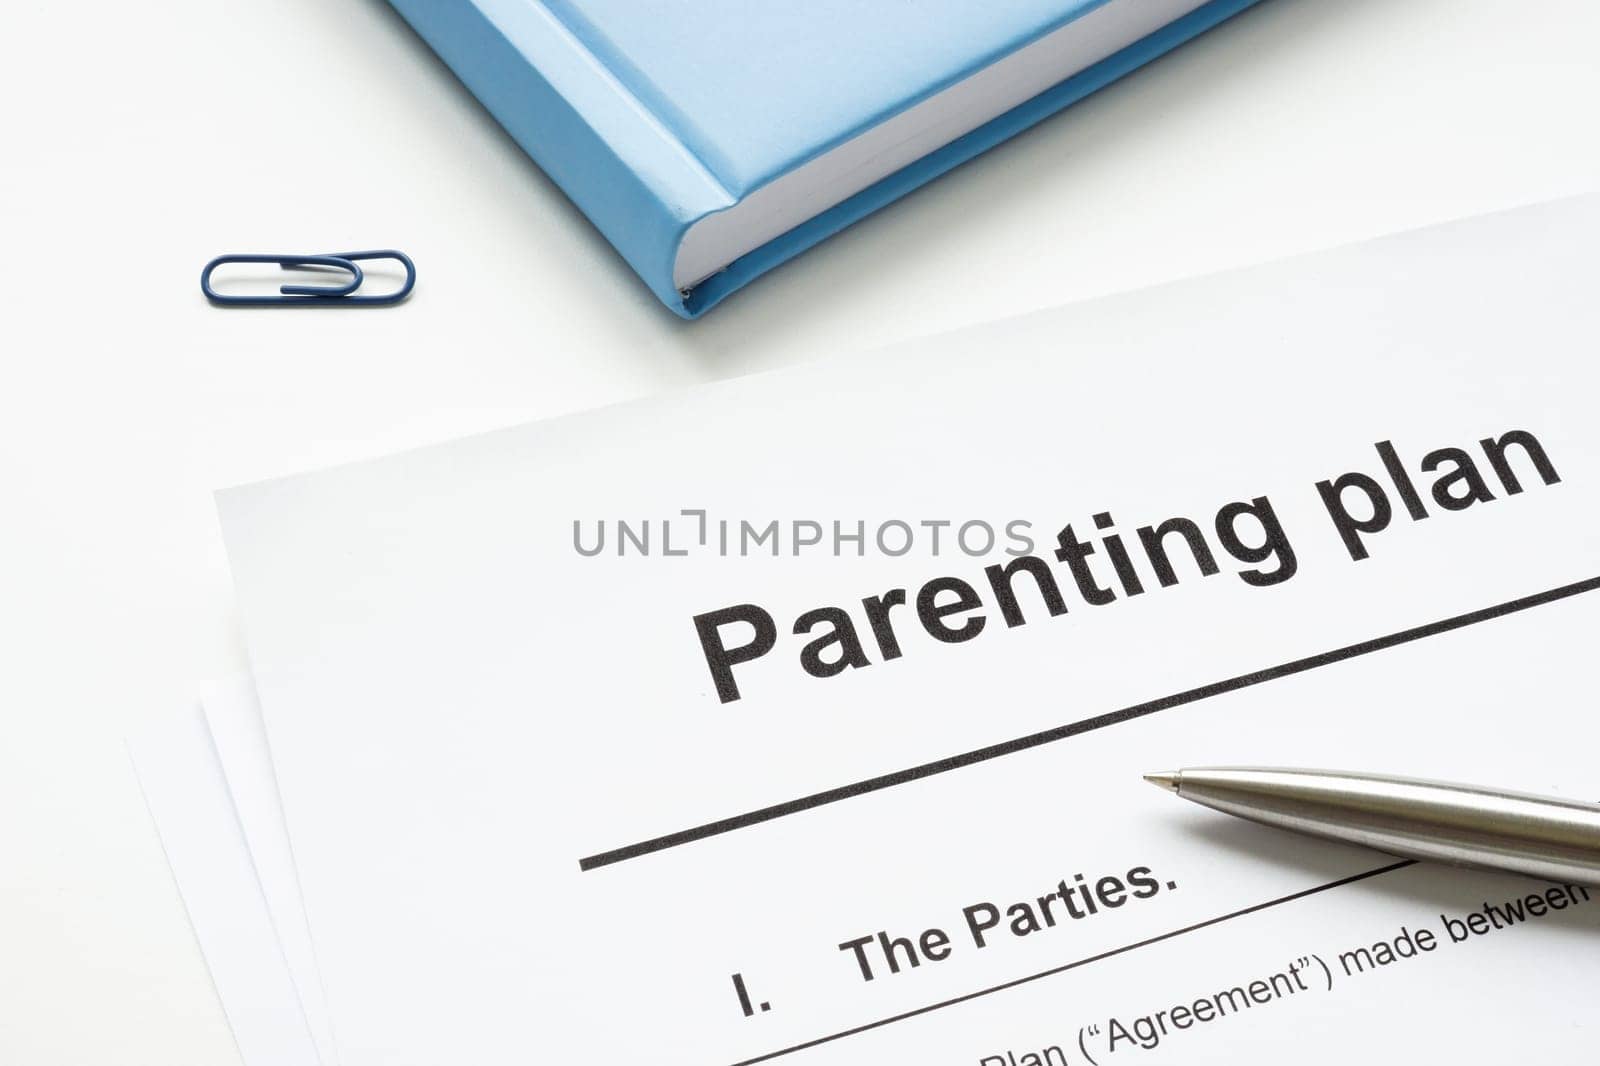 Parenting plan document and pen for signature. by designer491